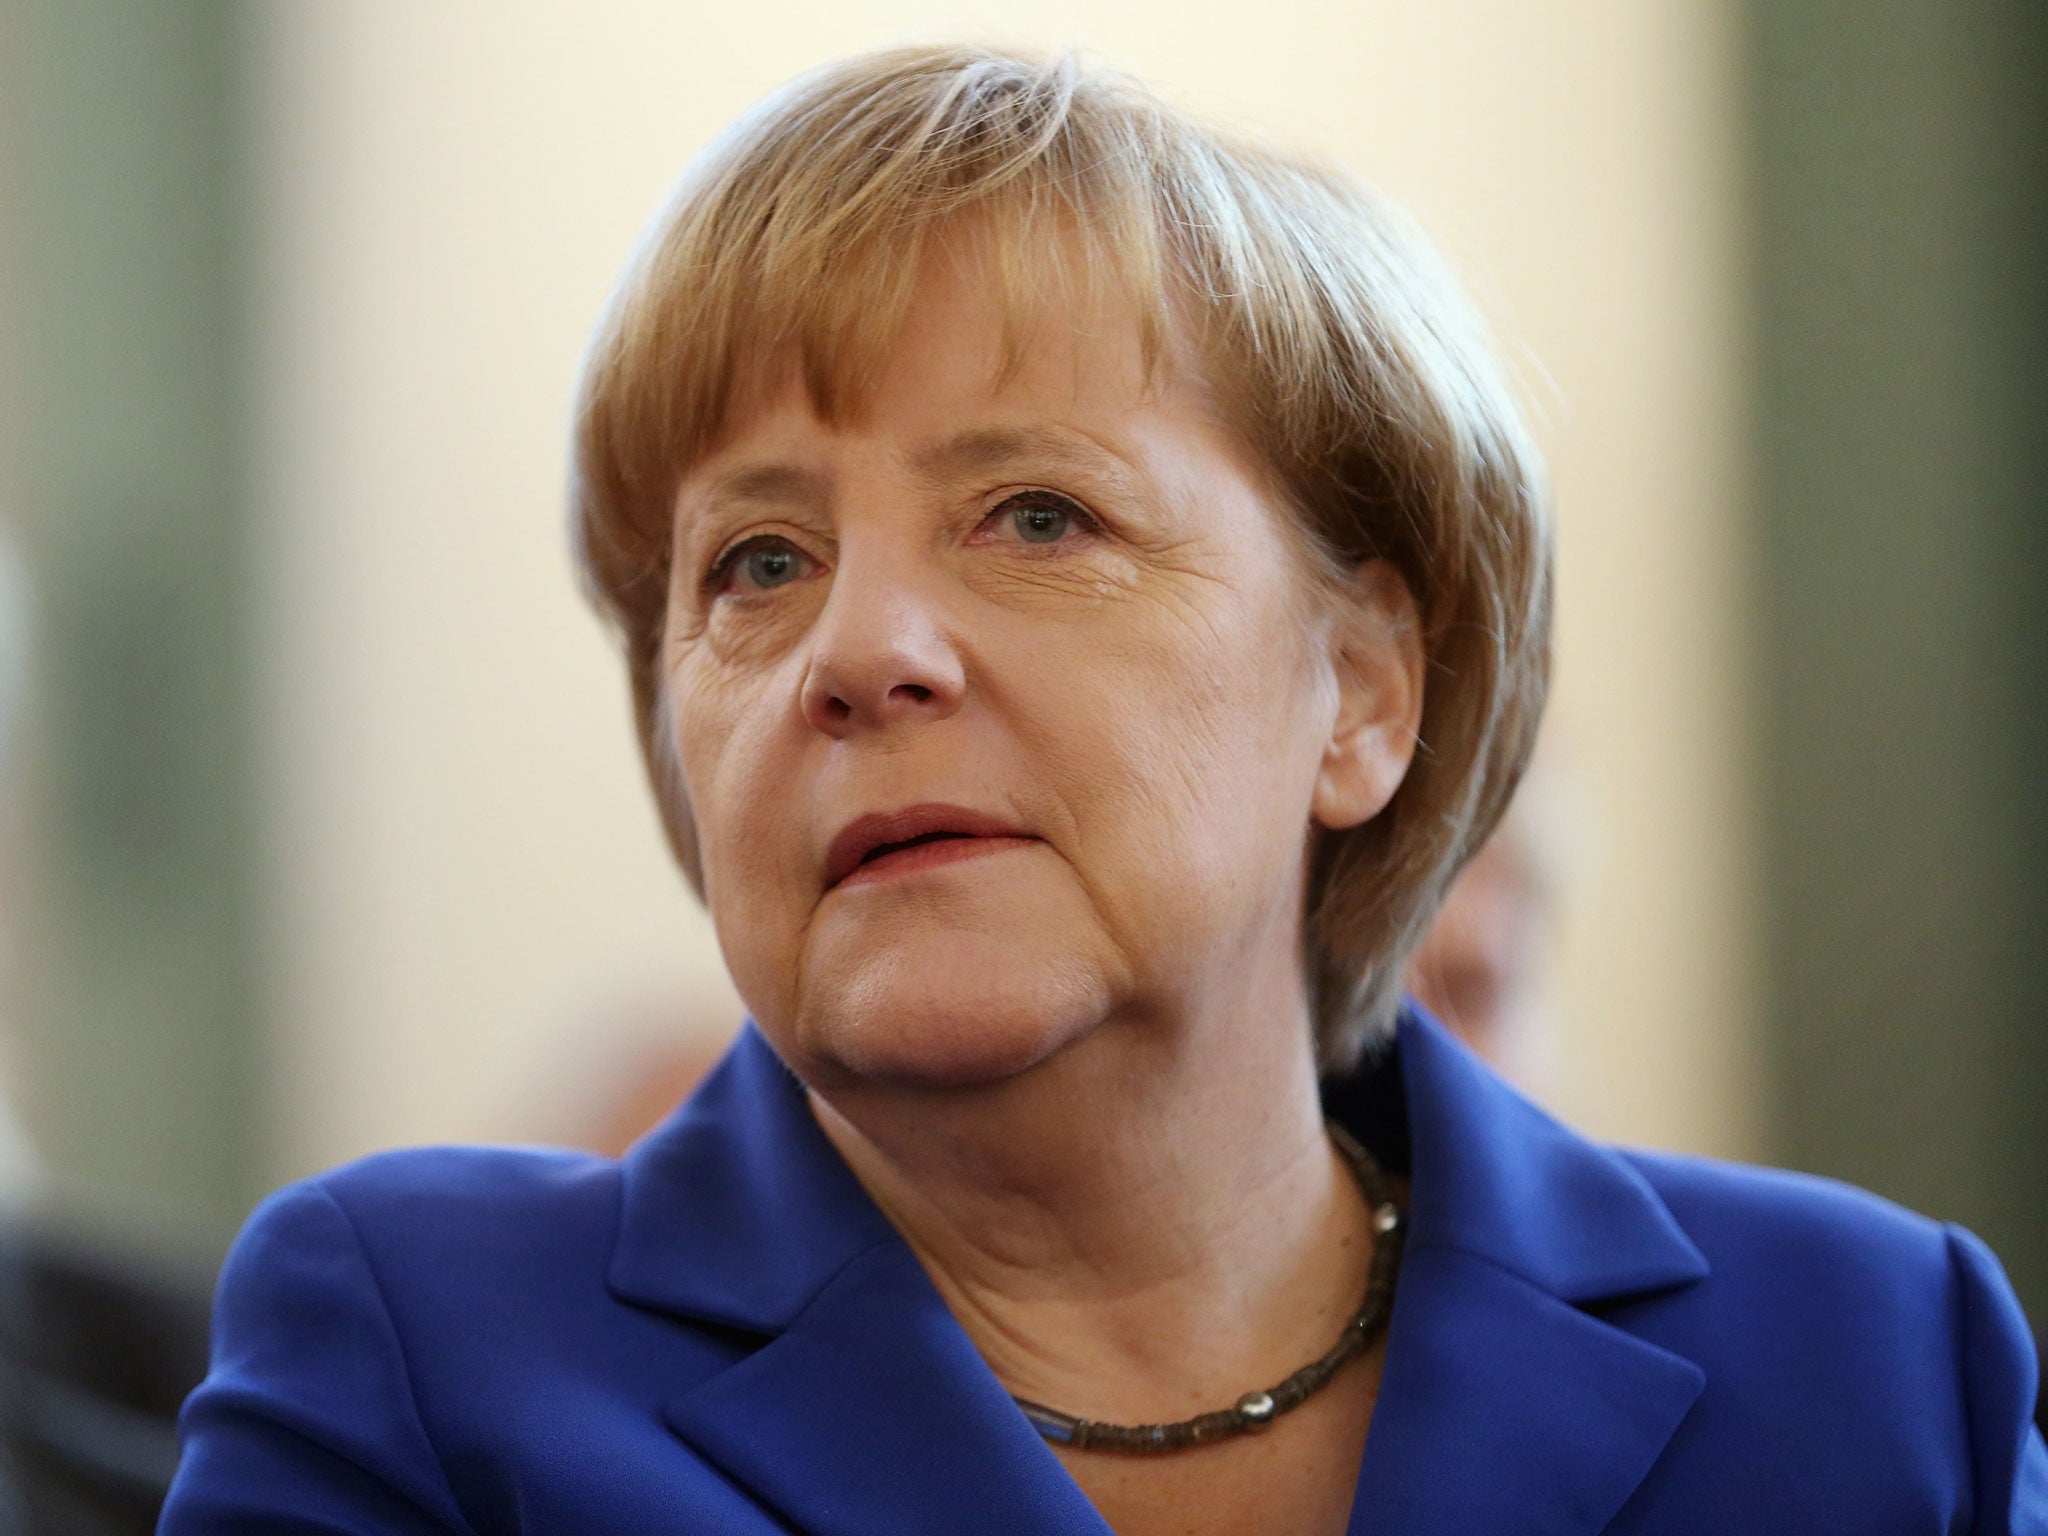 The agreement was made as part of ongoing coalition negotiations between Angela Merkel's conservatives and the SPD following last month's election